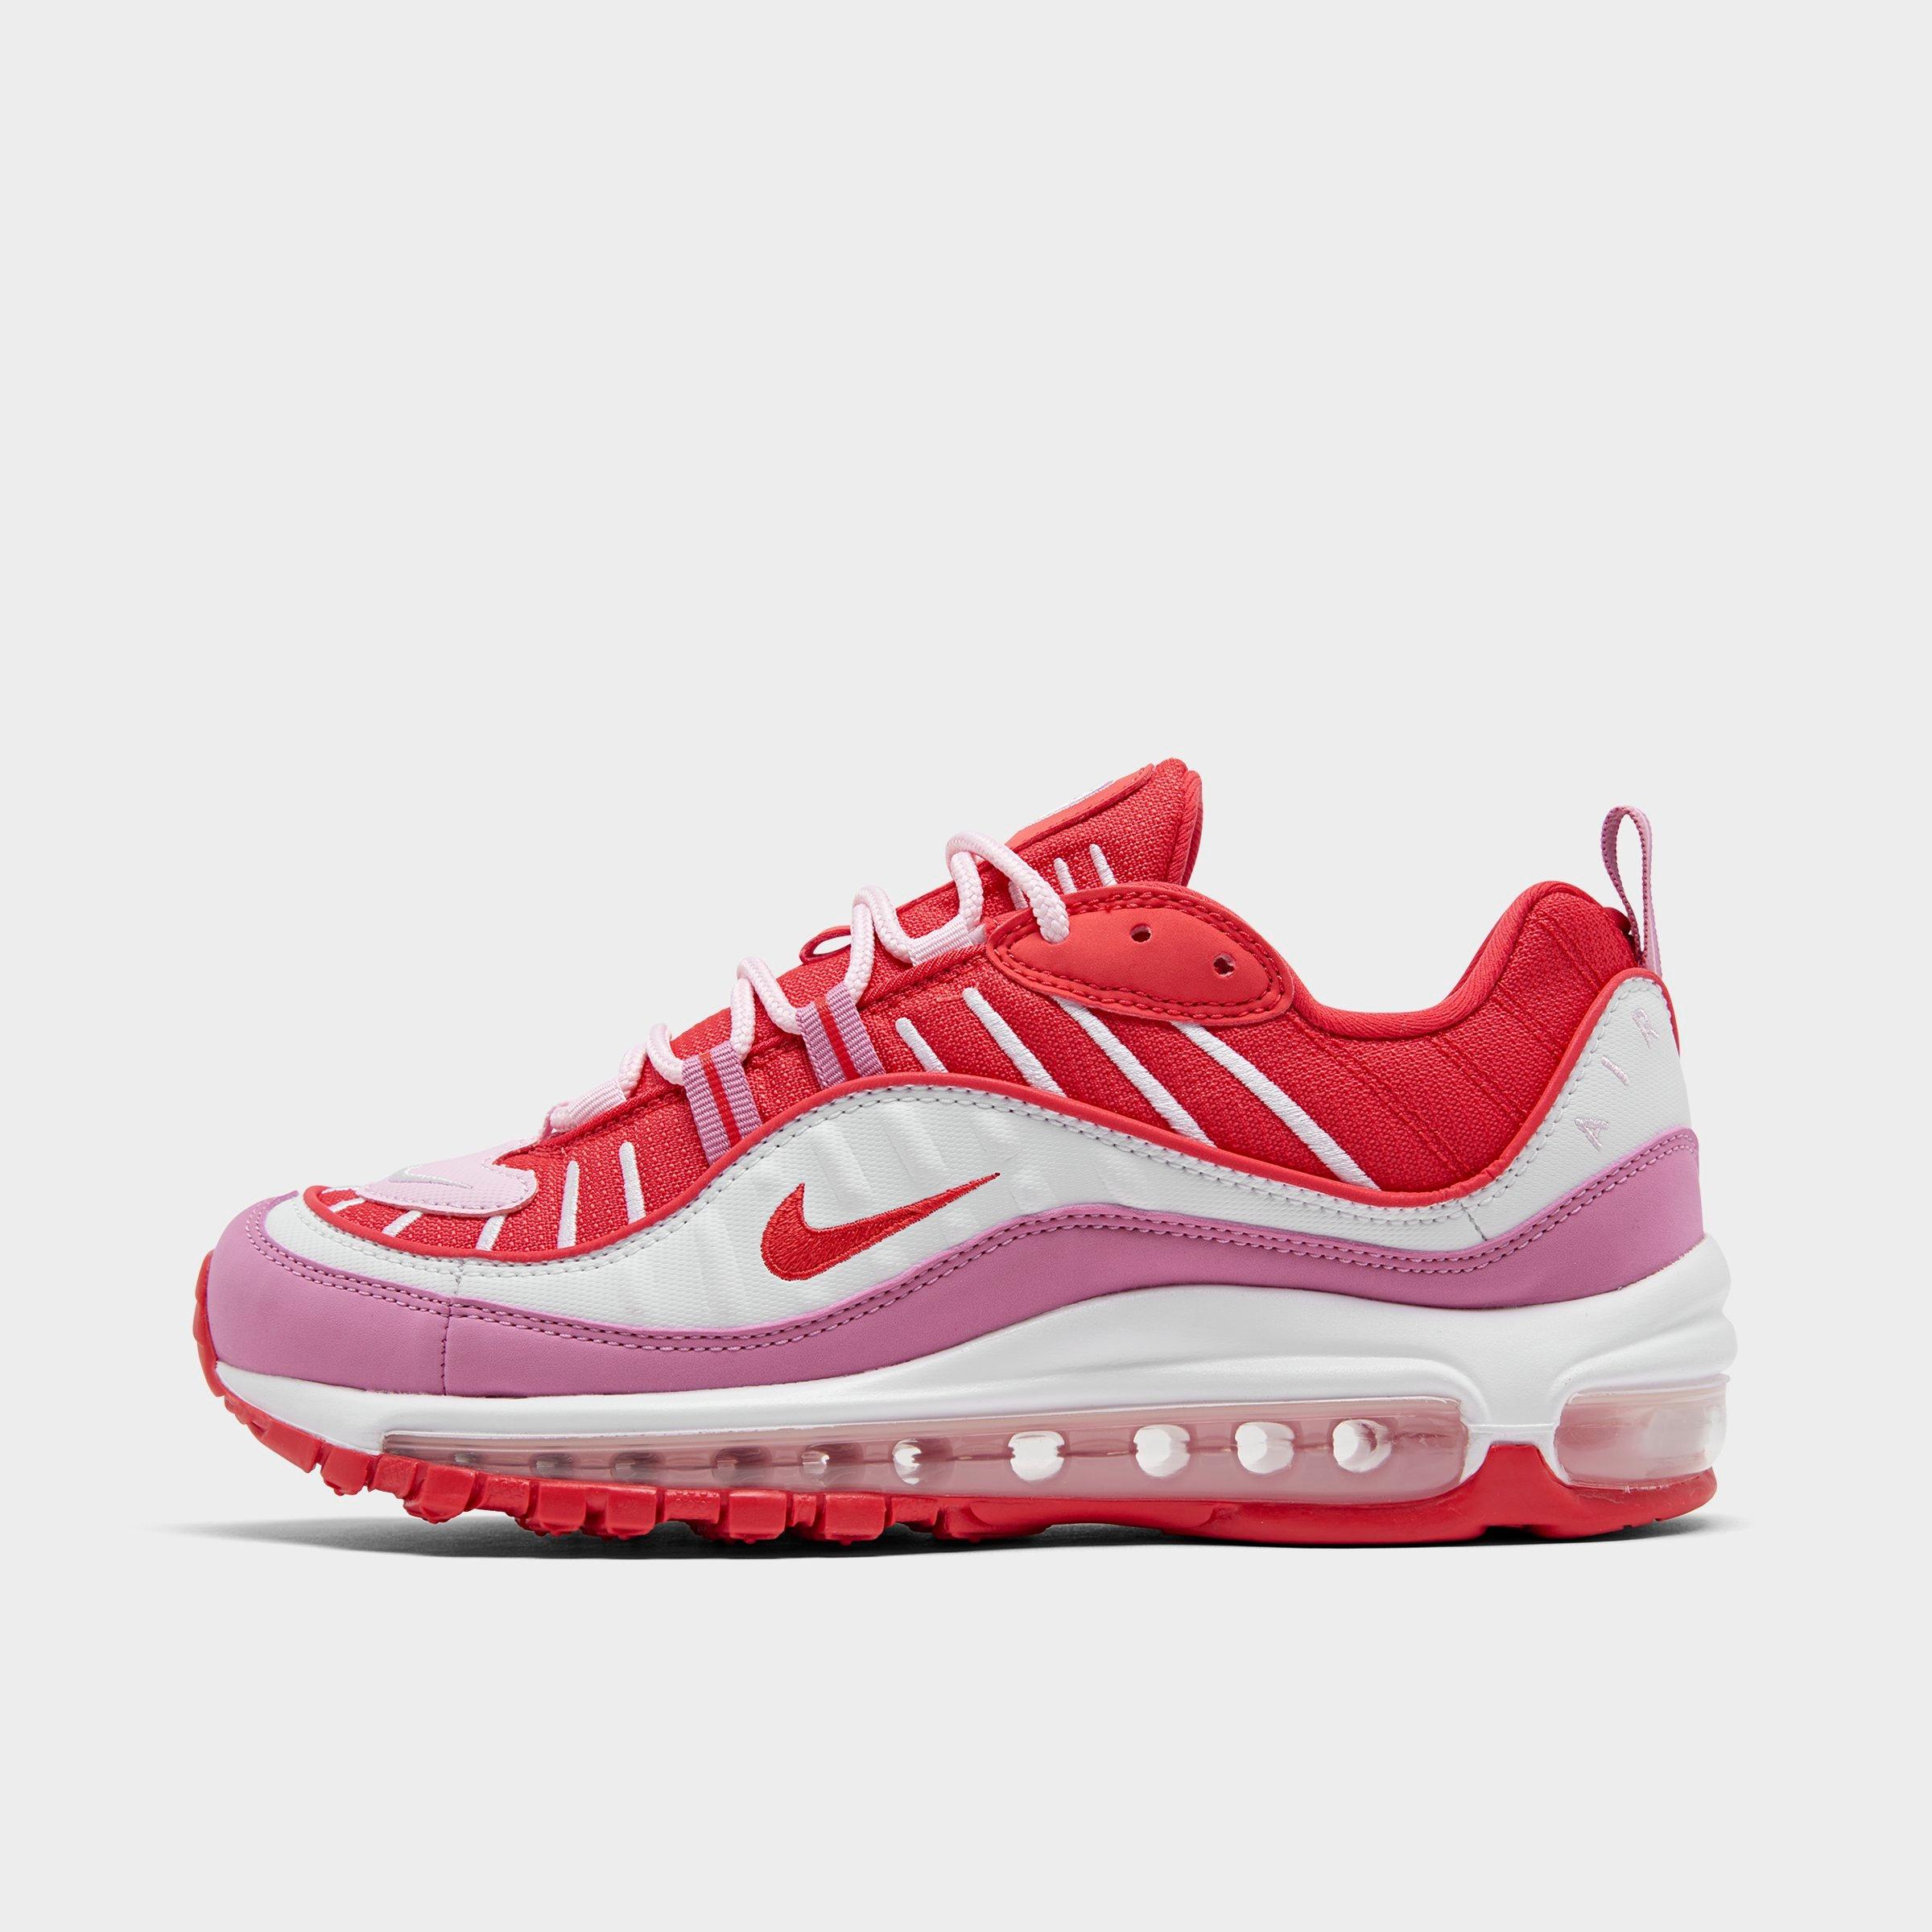 red and pink air max